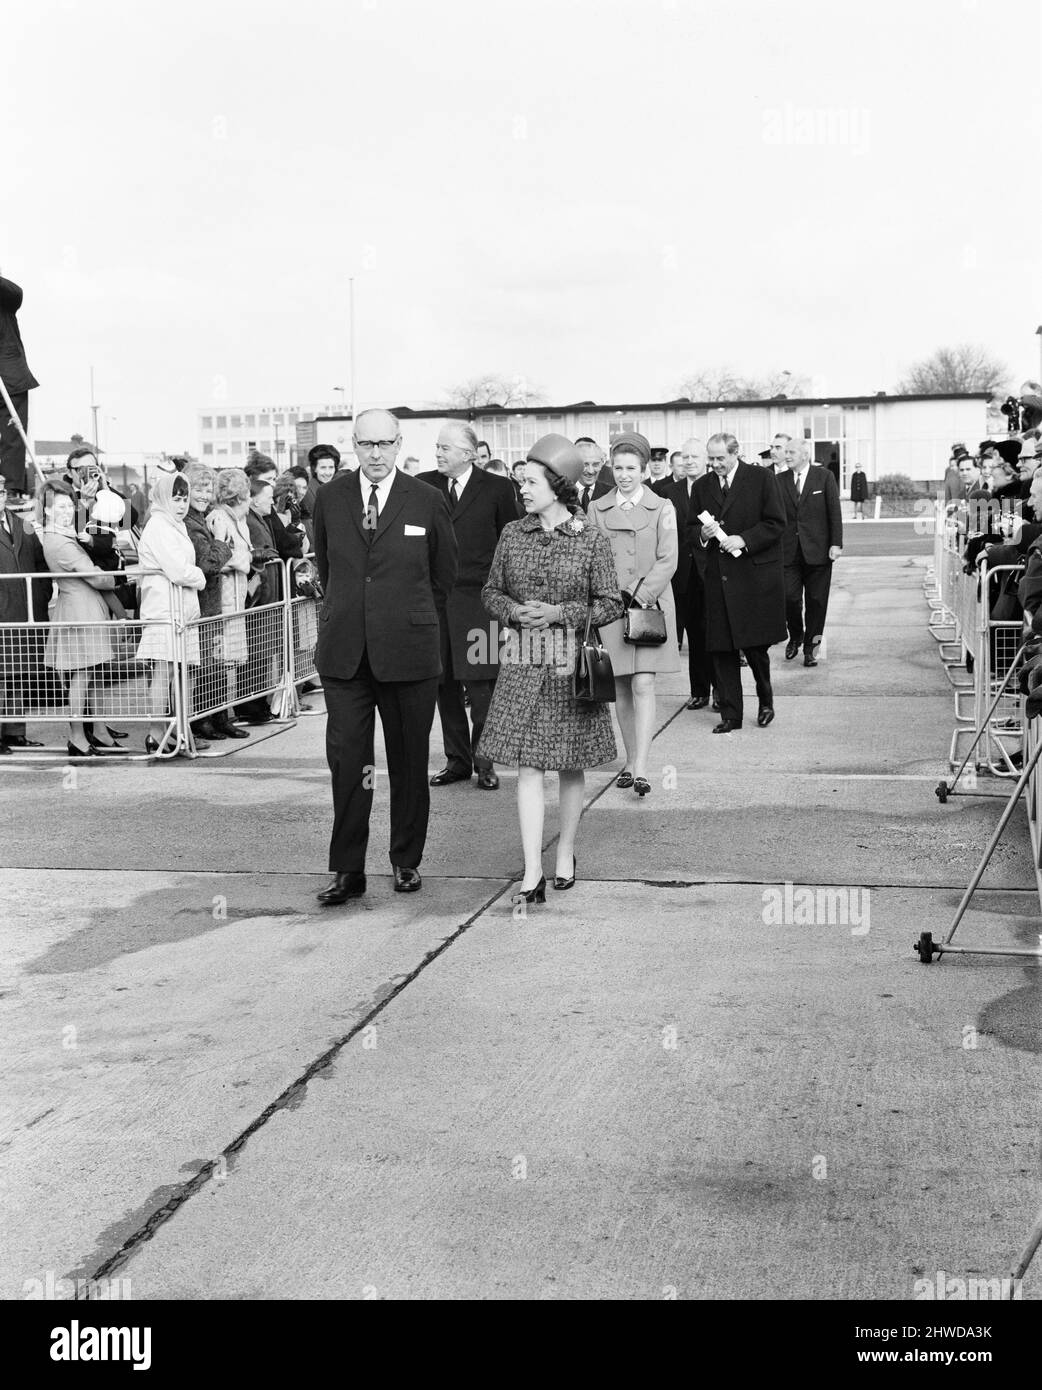 The Queen and Princess Anne, pictured at London Heathrow Airport, 2nd March 1970. On their way to Australia, on a nine week visit to Fiji, Tonga, New Zealand and Australia. The Duke of Edinburgh will join them at Vancouver tonight, he has been playing polo in Mexico after his visit to Cape Kennedy. The Prince of Wales will catch up with the Royal Party on 12th March in Wellington. Stock Photo